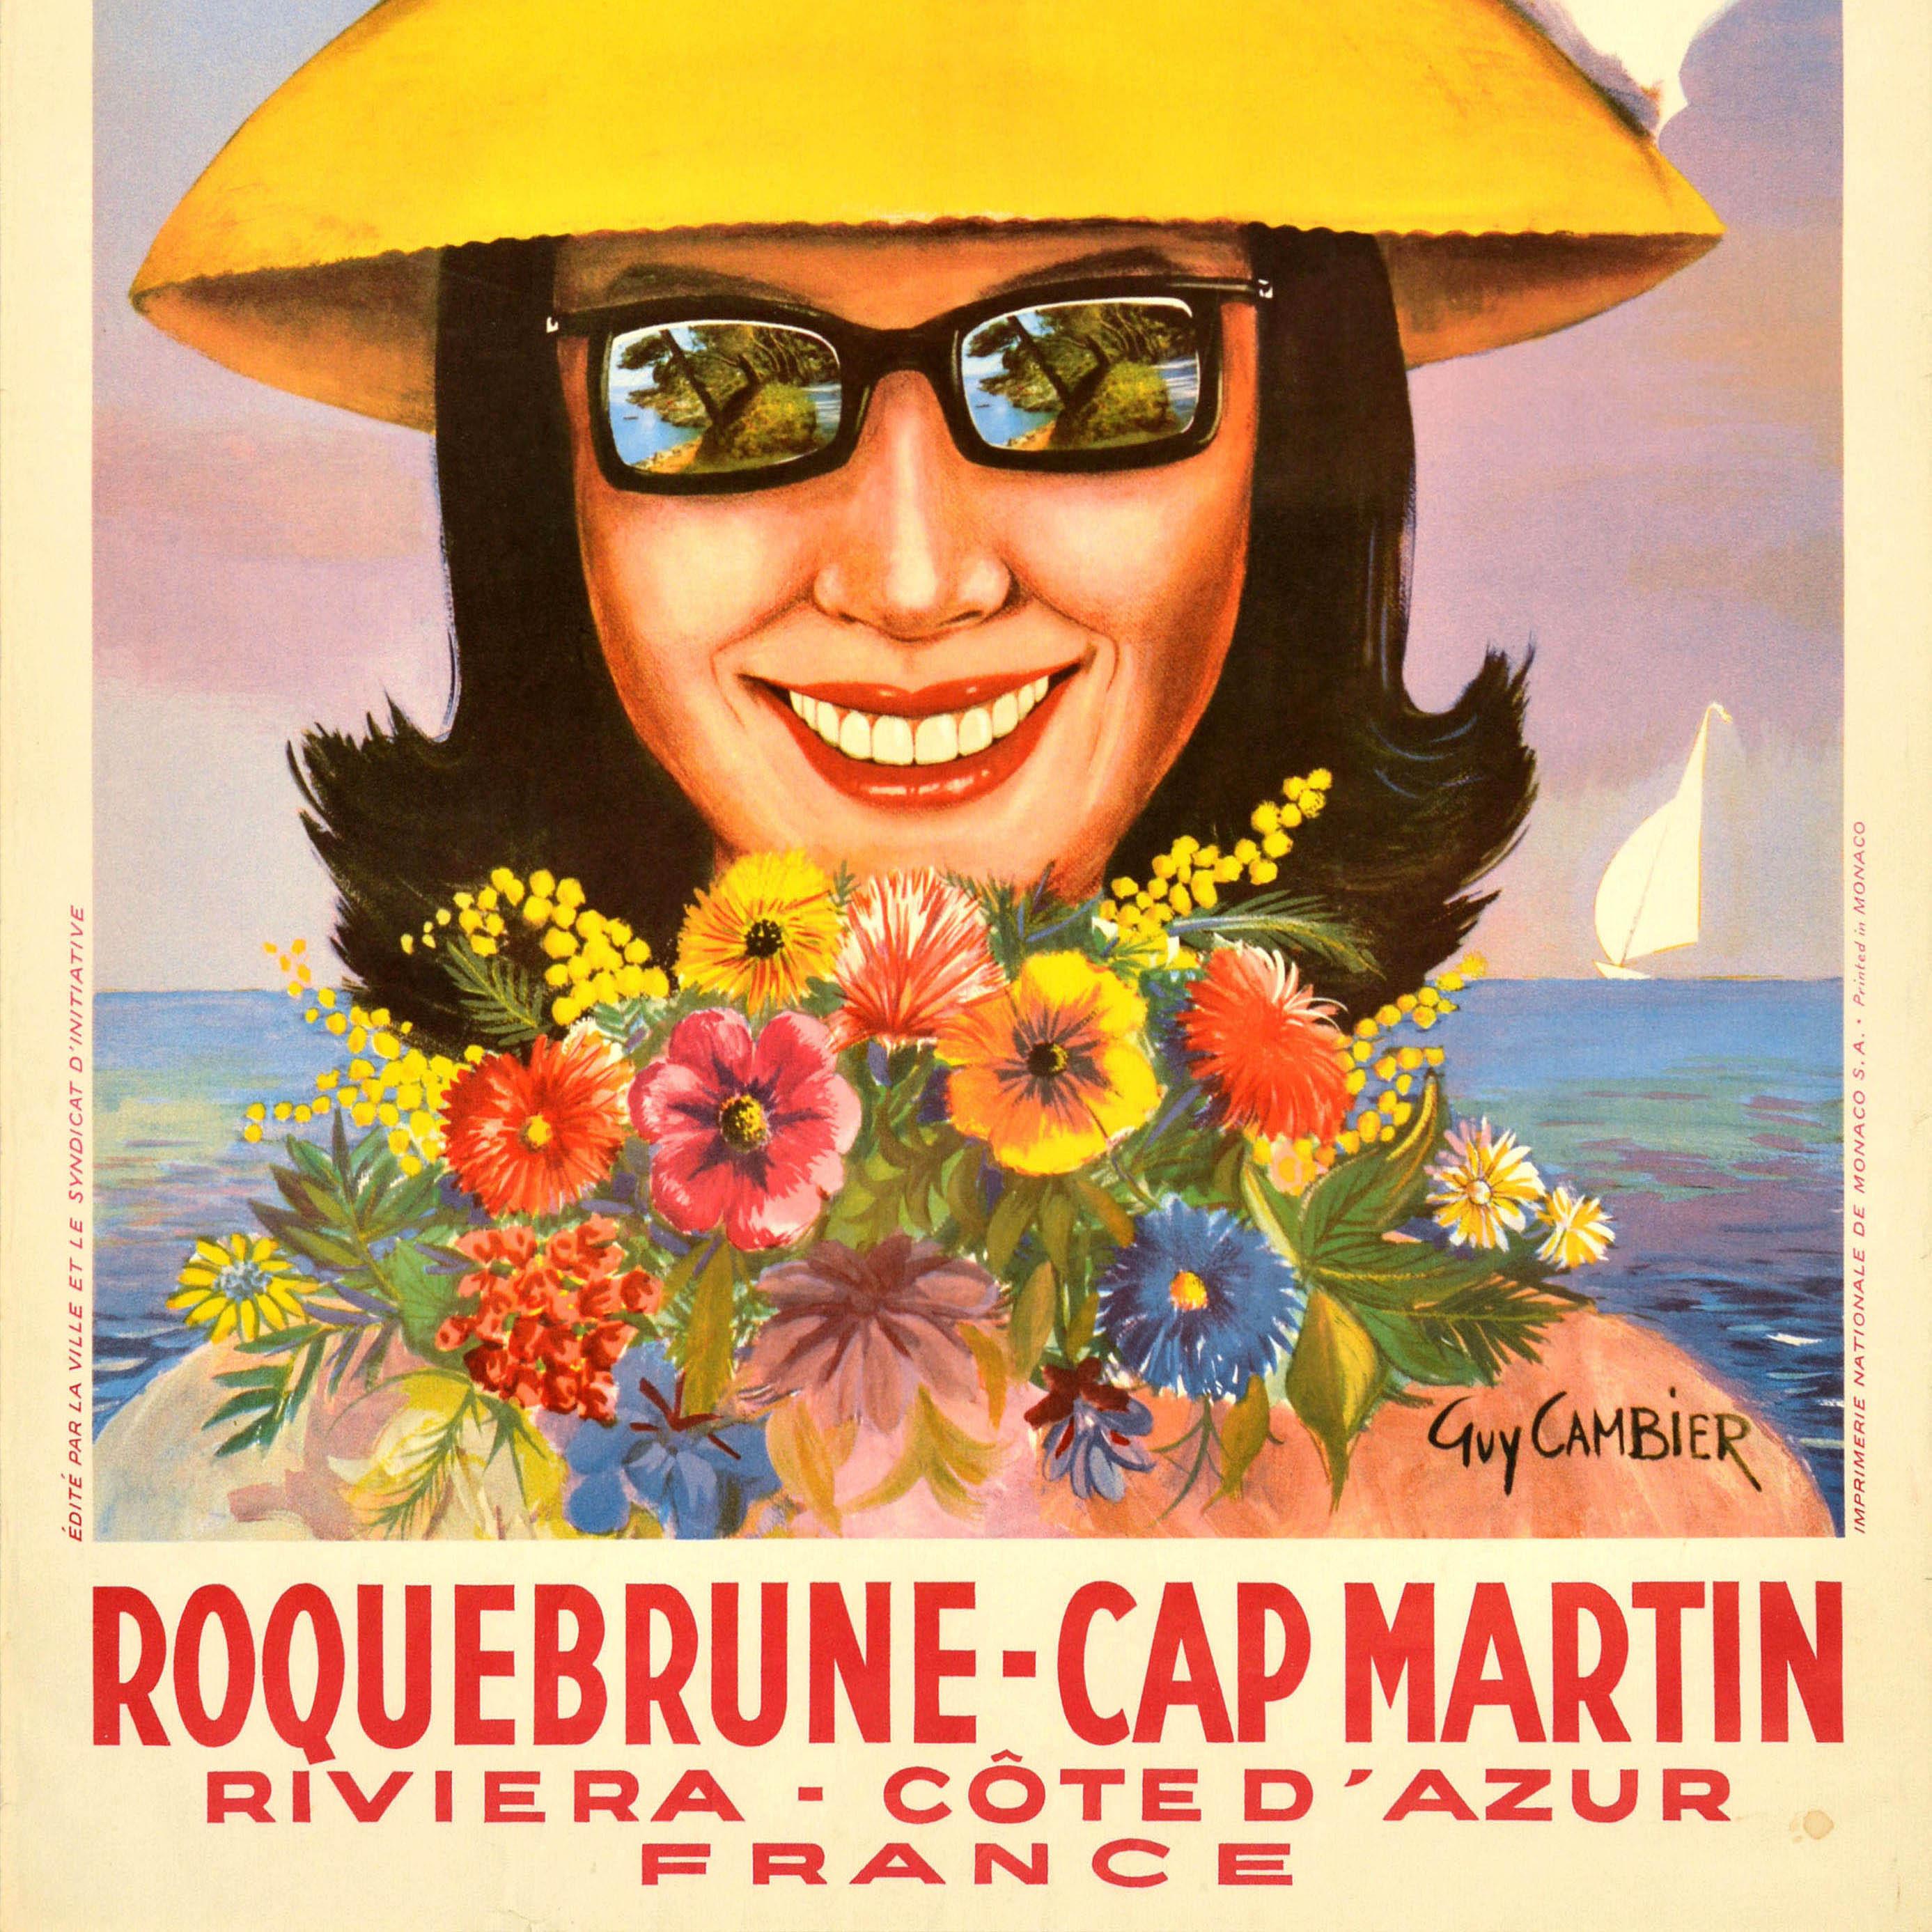 Original vintage travel poster for Roquebrune Cap Martin Riviera Cote d'Azur France featuring a colourful illustration of a smiling lady in a summer hat with a red, white and blue for the French flag tied around it, and reflective sunglasses holding